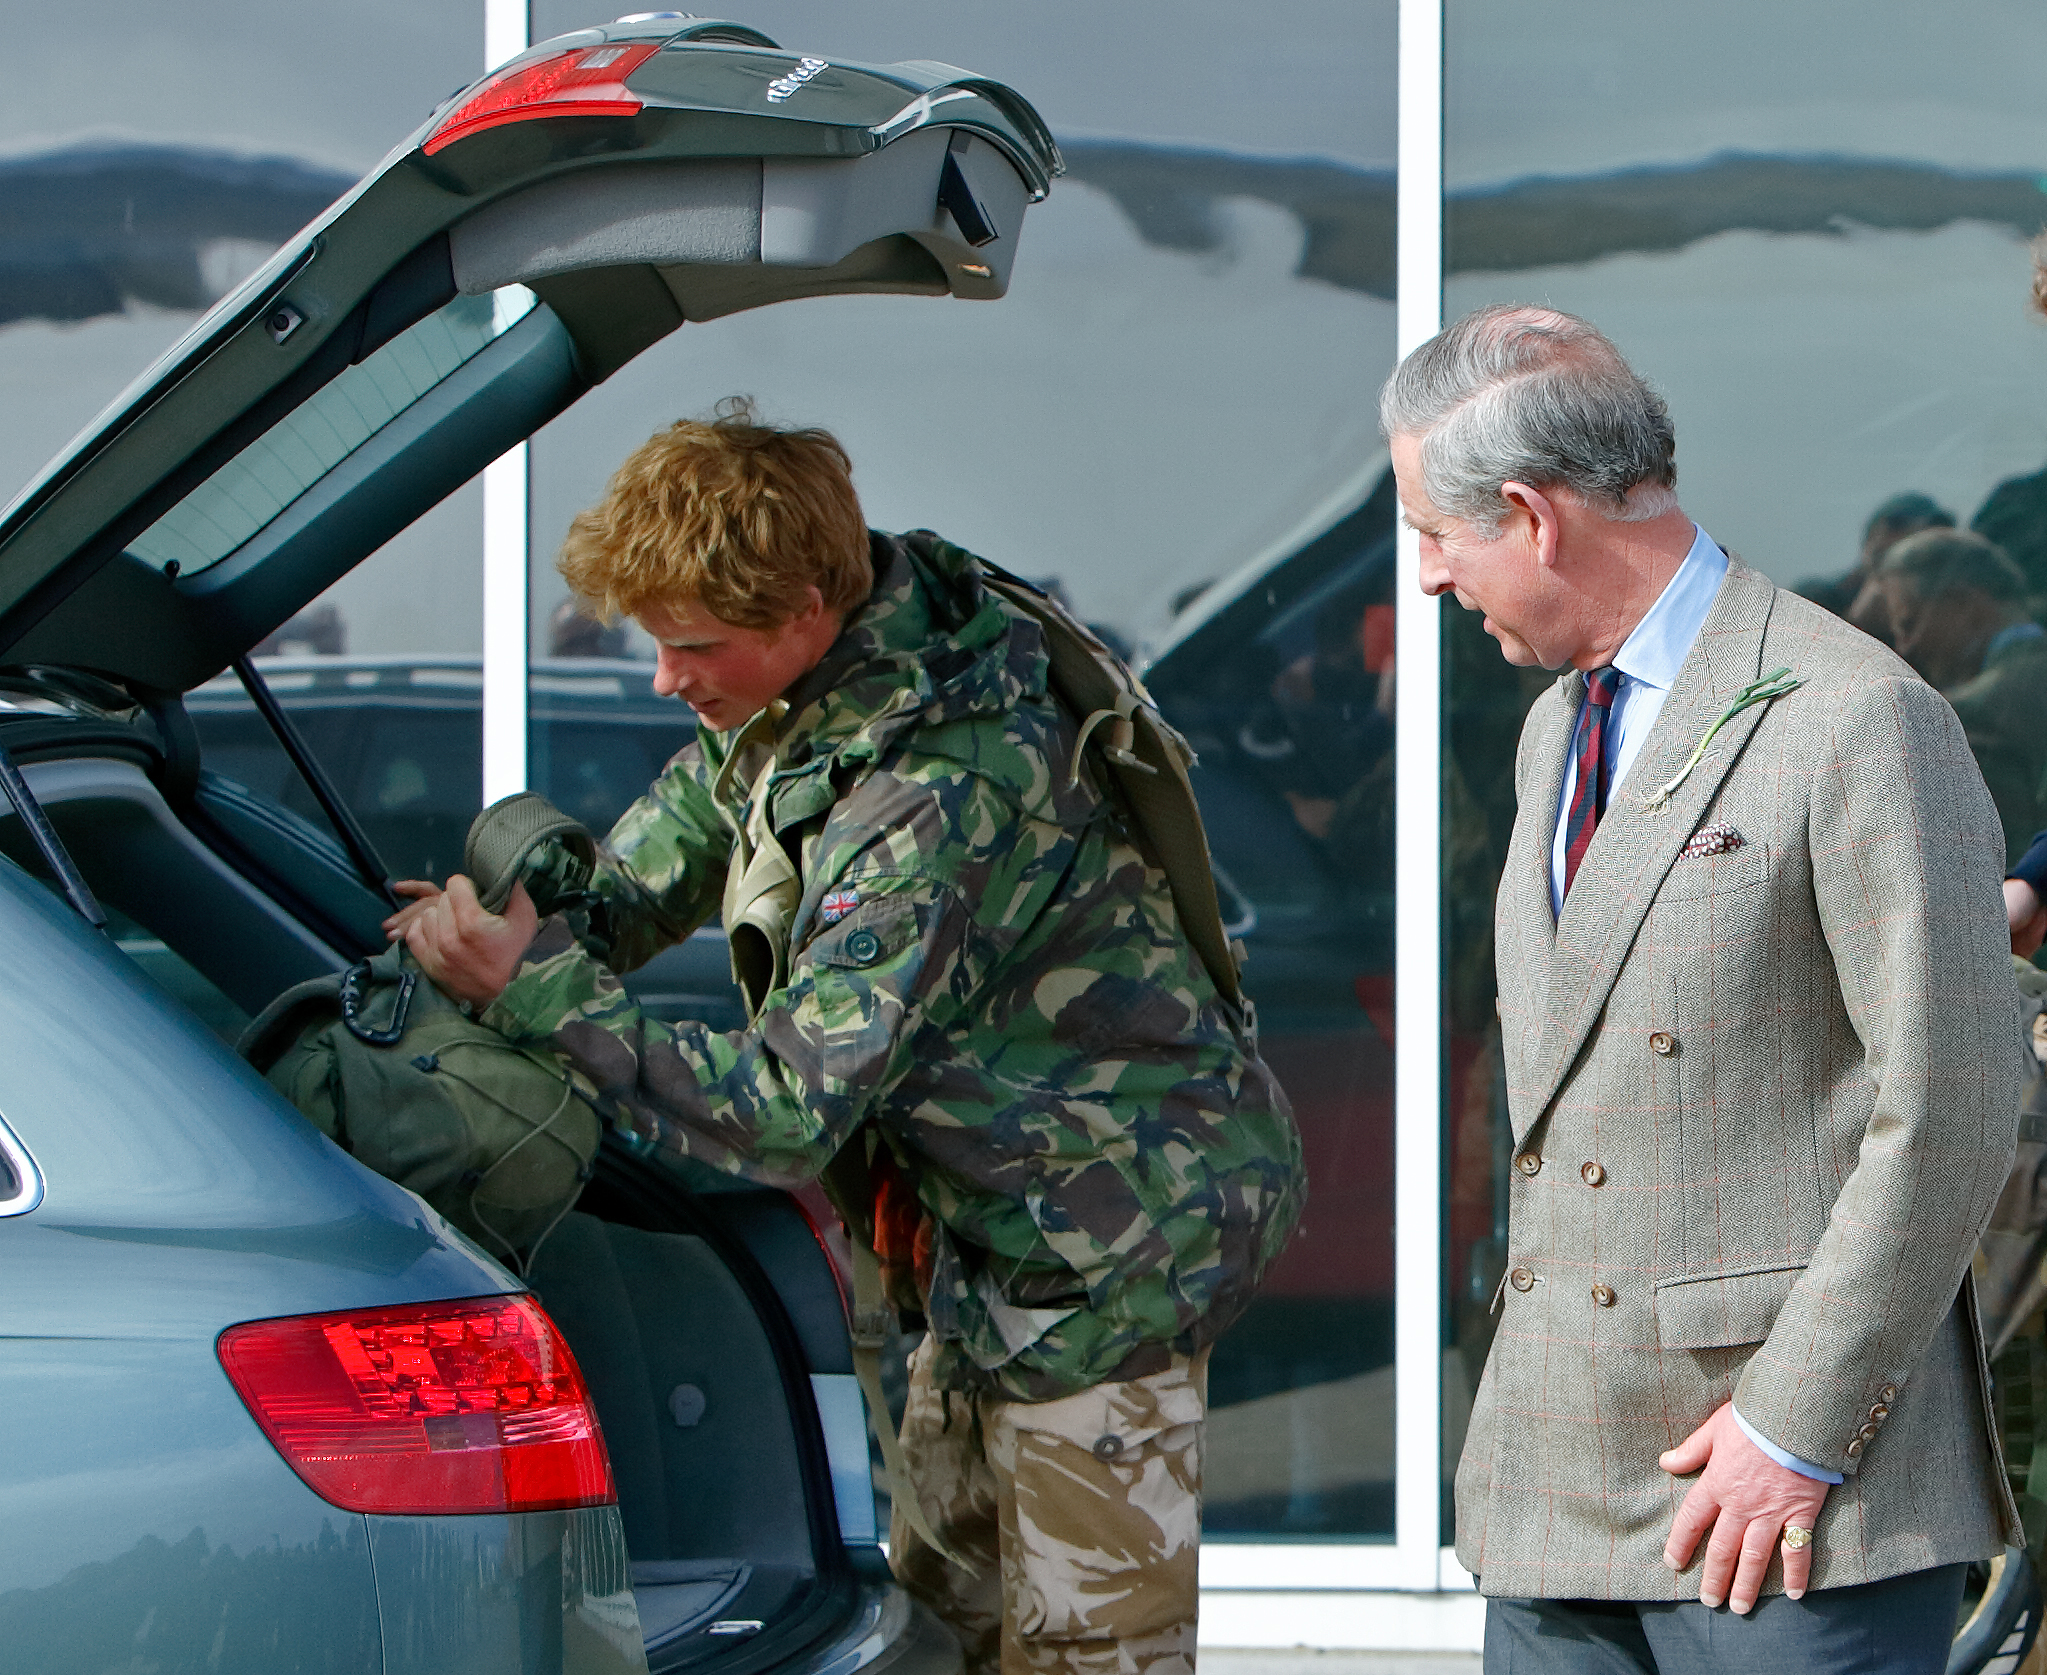 Prince Harry loads his kit bags in the company of his father Prince Charles on March 1, 2008 in Brize Norton, England | Source: Getty Images